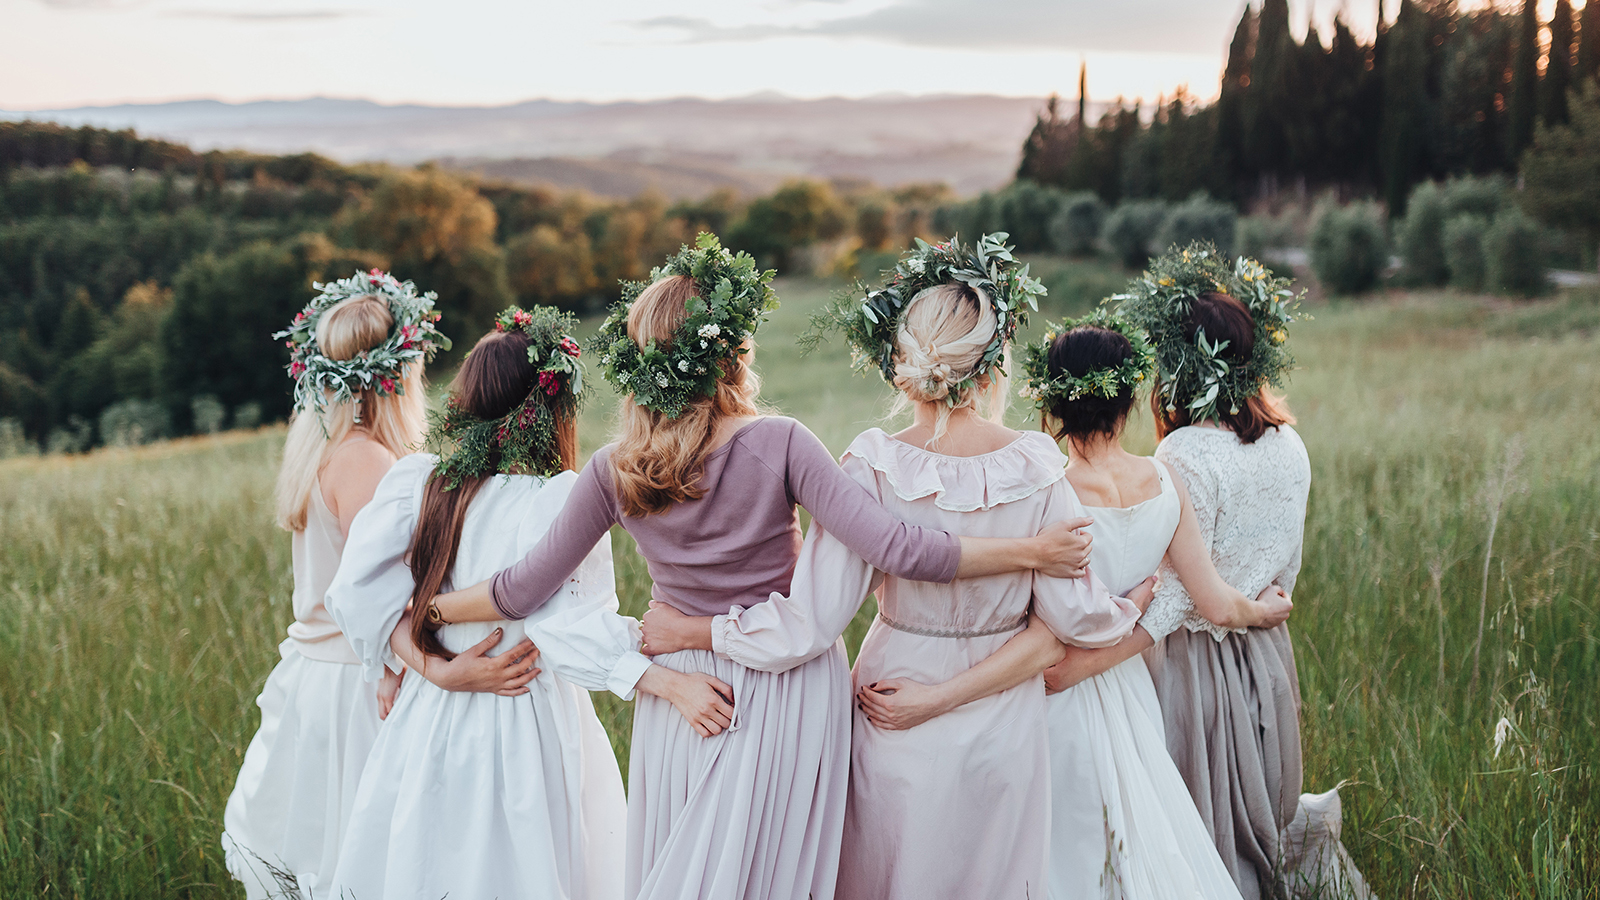 Girls in dresses and wreaths of flowers and greenery are in the green field at sunset